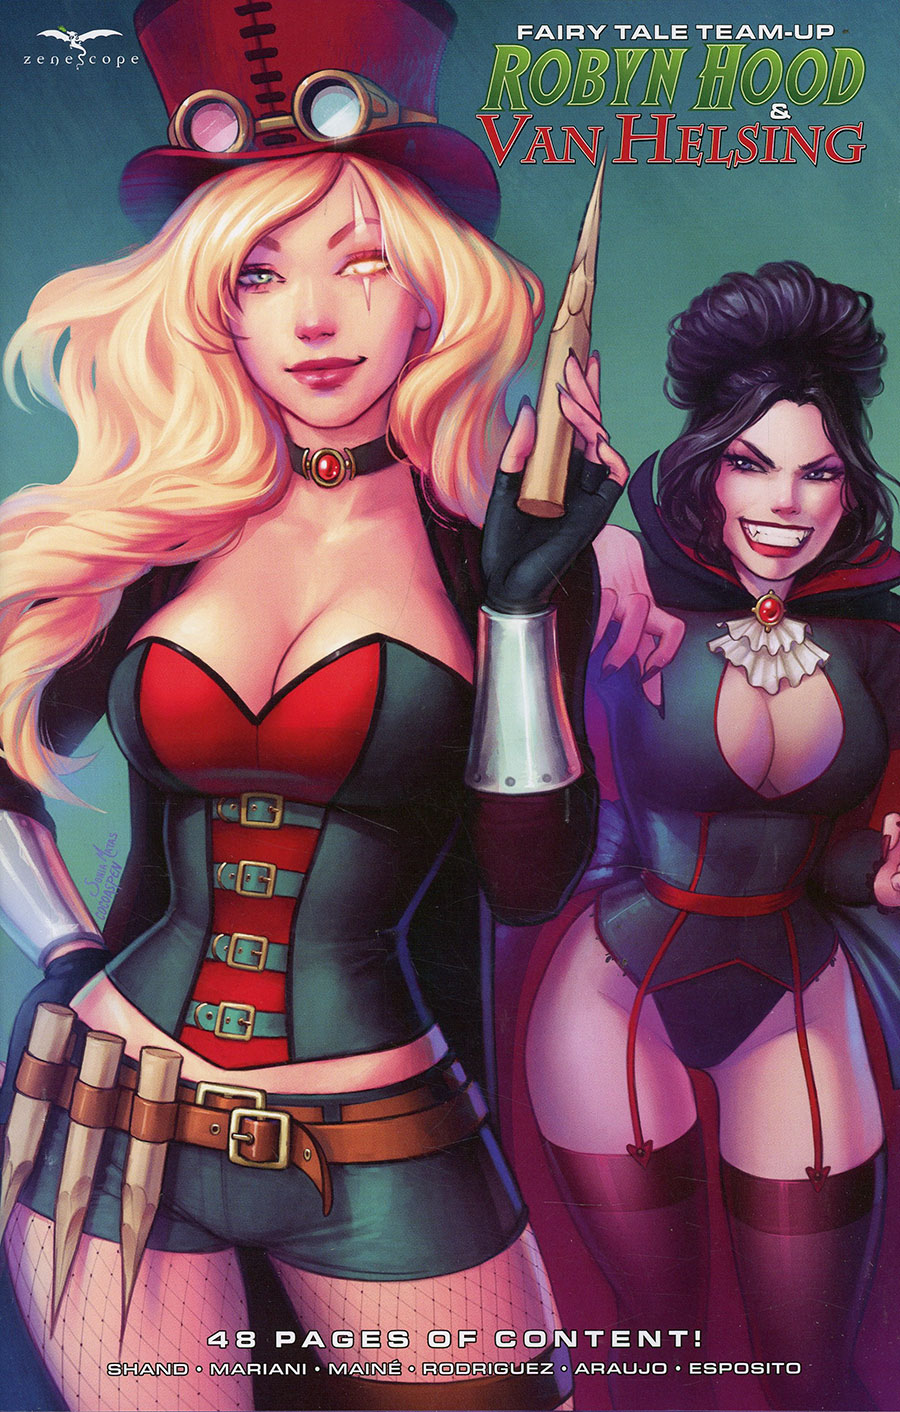 Grimm Fairy Tales Presents Fairy Tale Team-Up Robyn Hood & Van Helsing #1 (One Shot) Cover C Variant Sonia Matas Cover